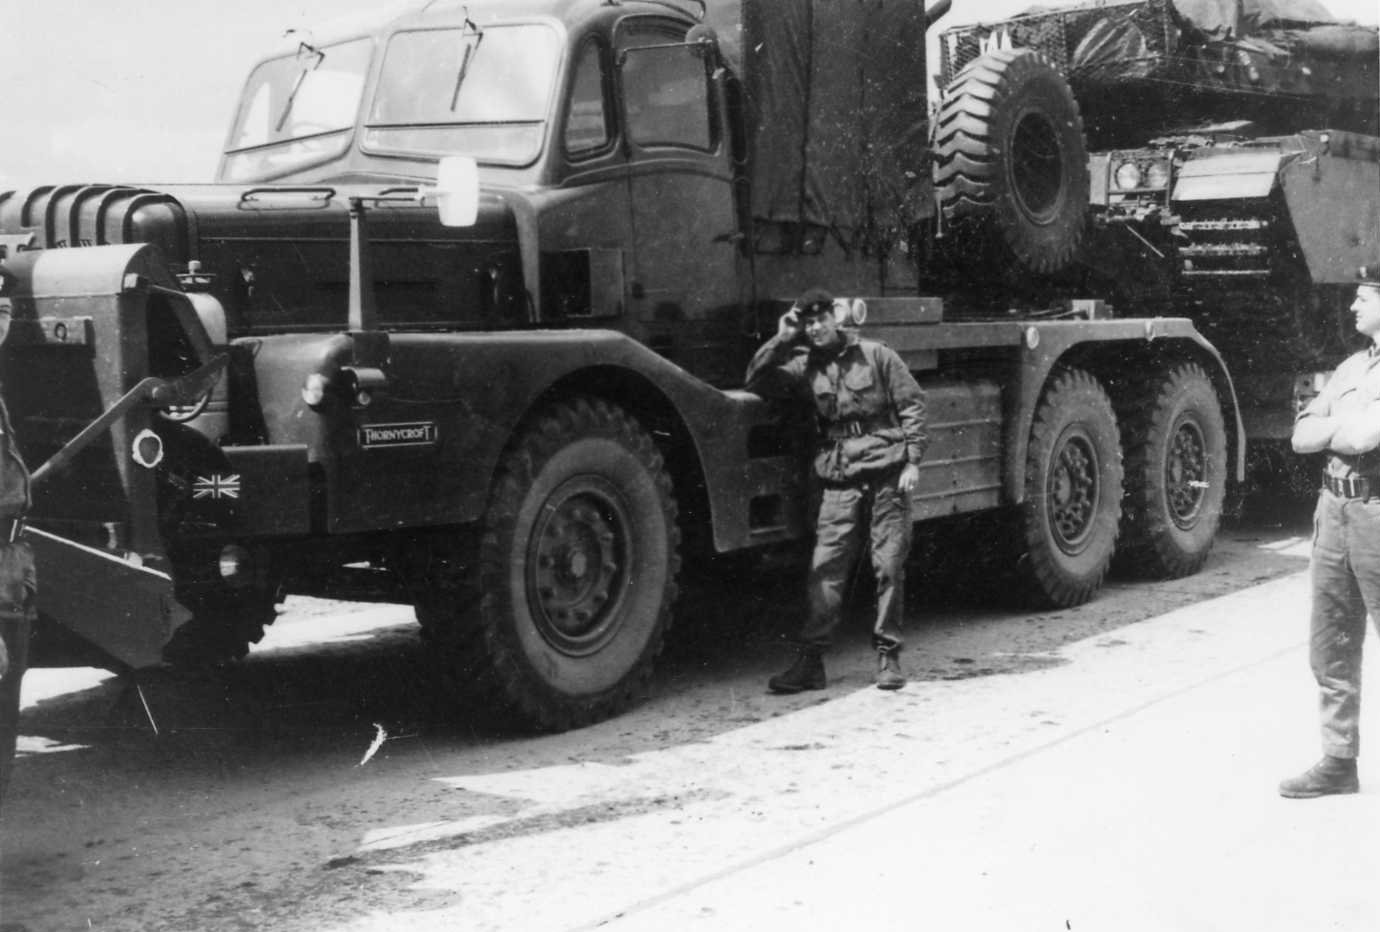 Soldier leaning on a car carrying centurion tank